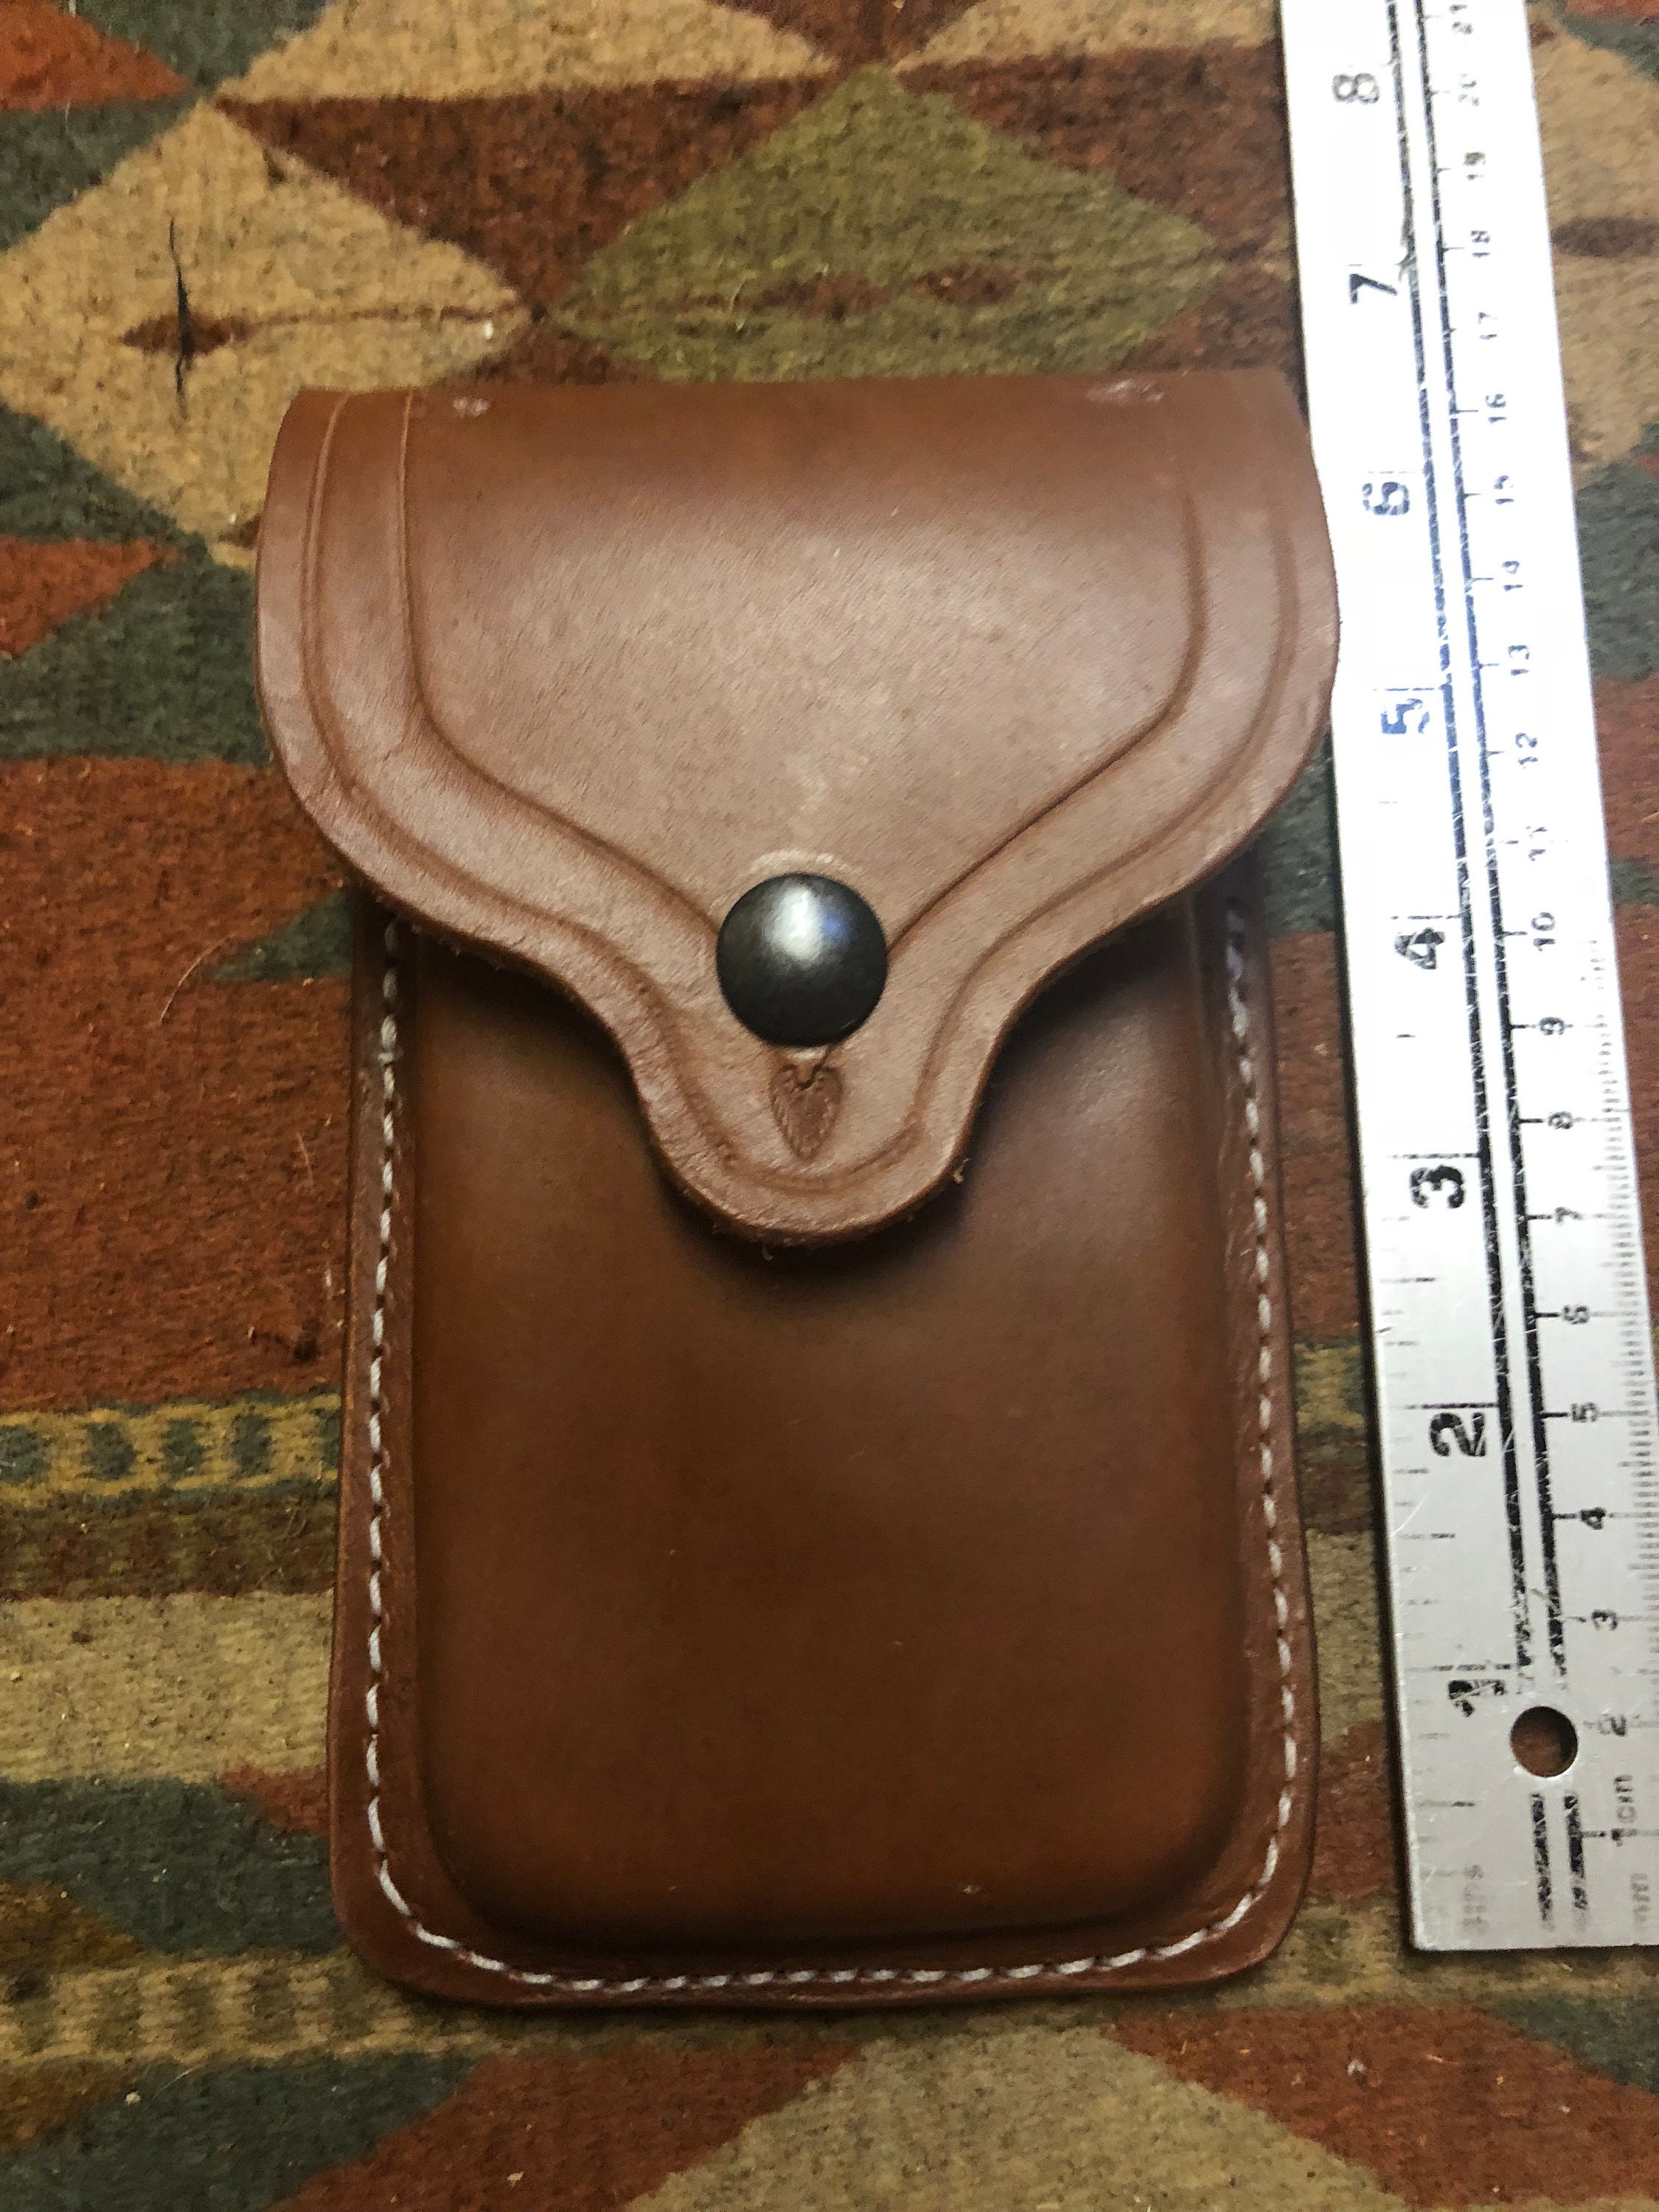 Galco Single Magazine Case, Leather Loop, .380 - 1 out of 18 models